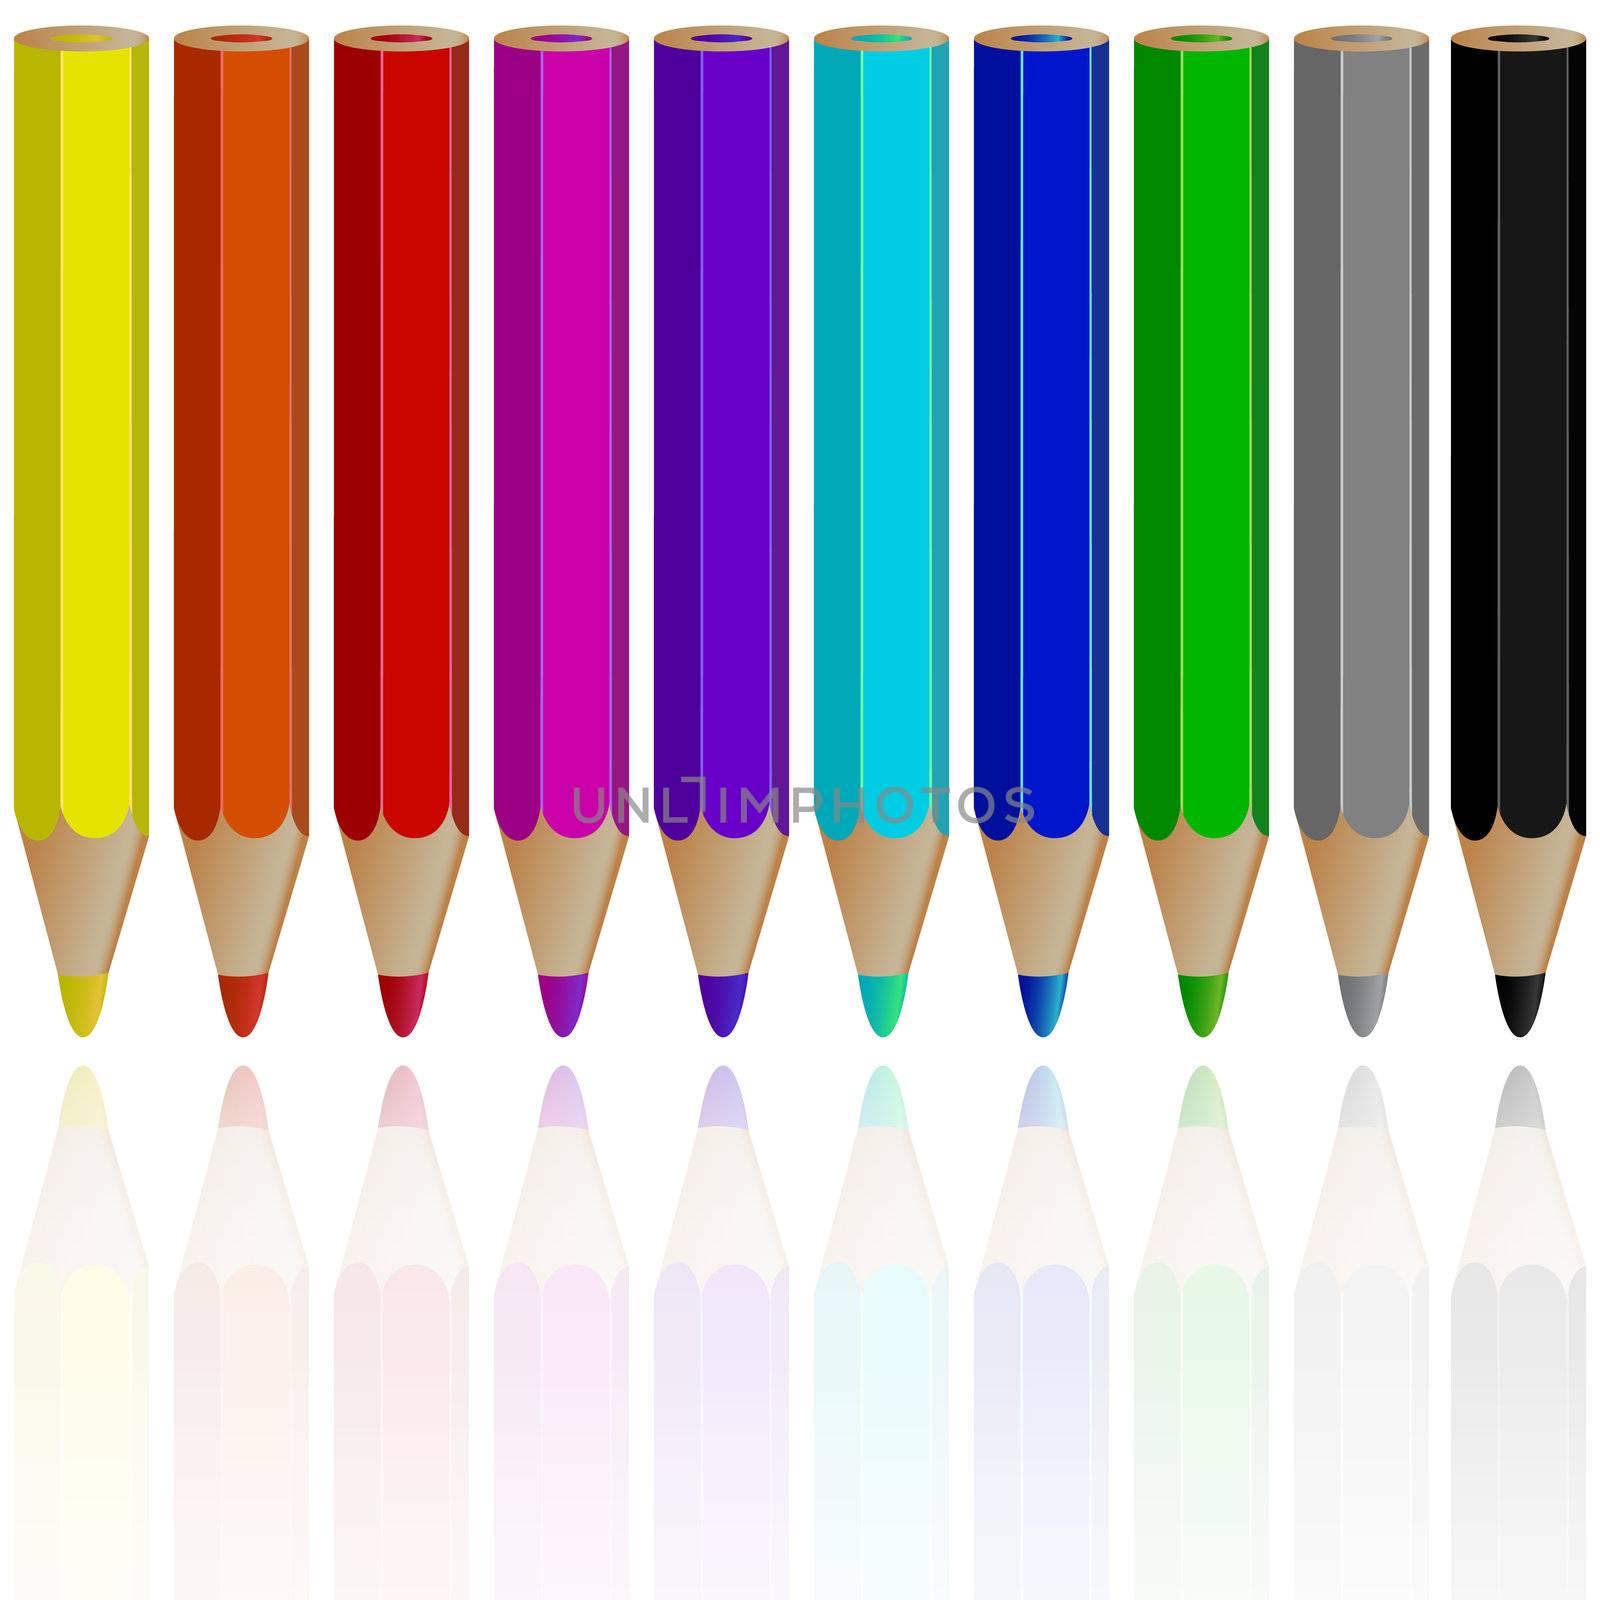 pencils reflected against white background, abstract vector art illustration; image contains transparency